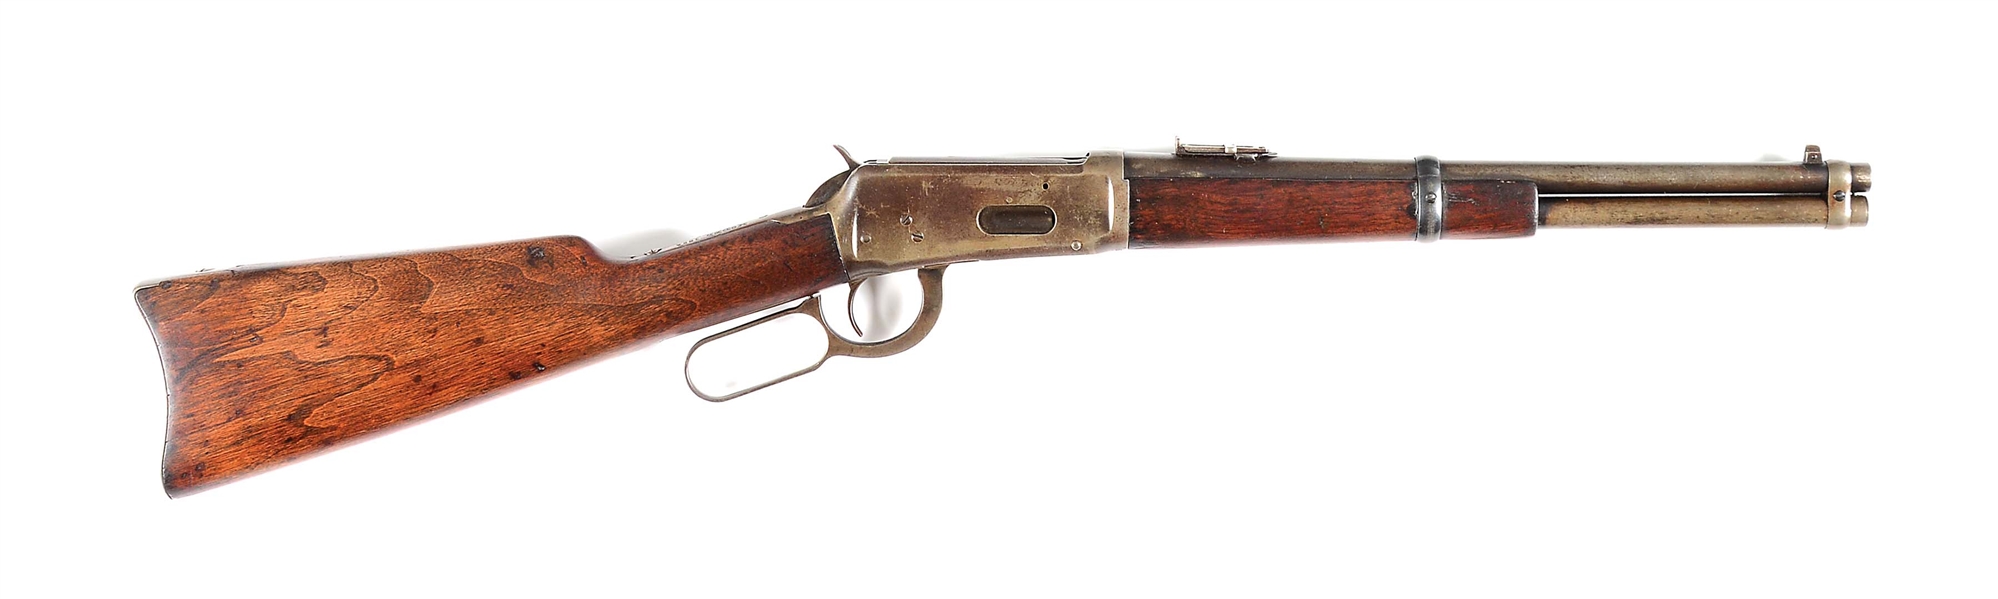 (C) WINCHESTER MODEL 1894 TRAPPER LEVER ACTION CARBINE WITH ATF EXEMPTION LETTER (1912).